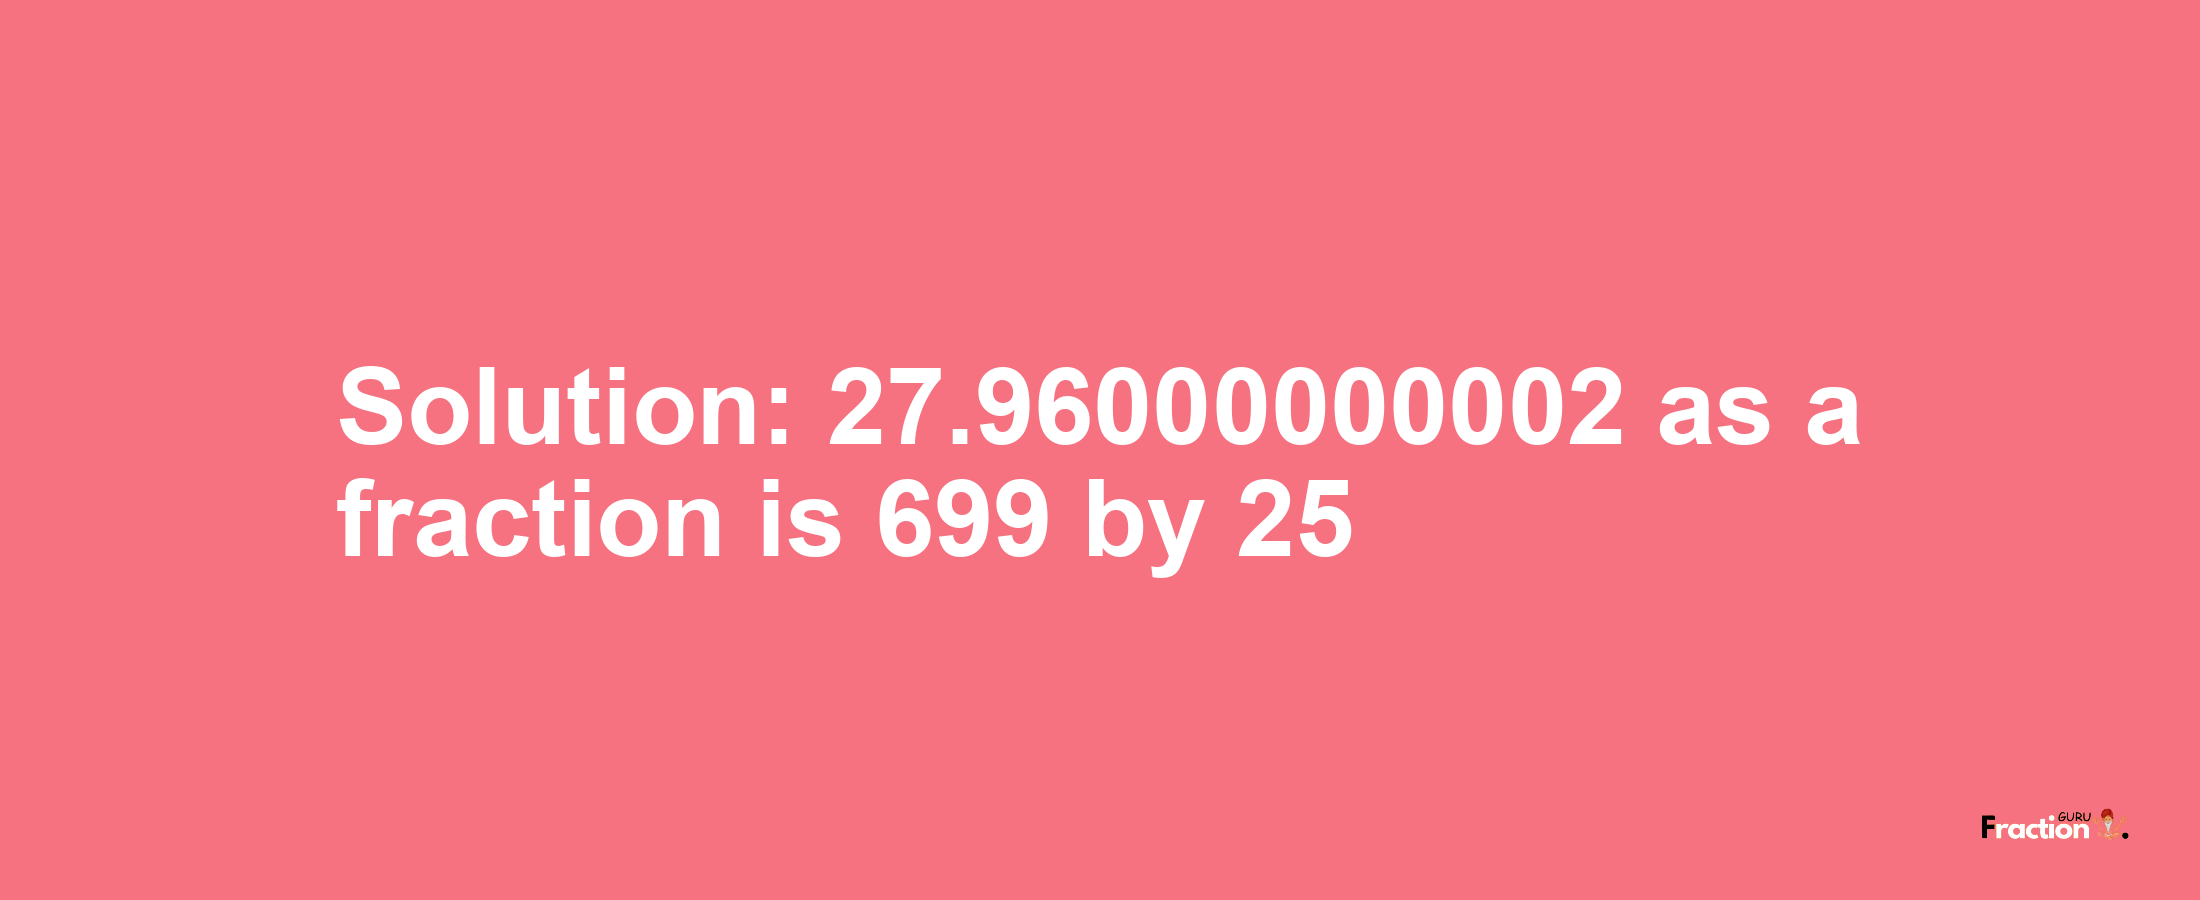 Solution:27.96000000002 as a fraction is 699/25